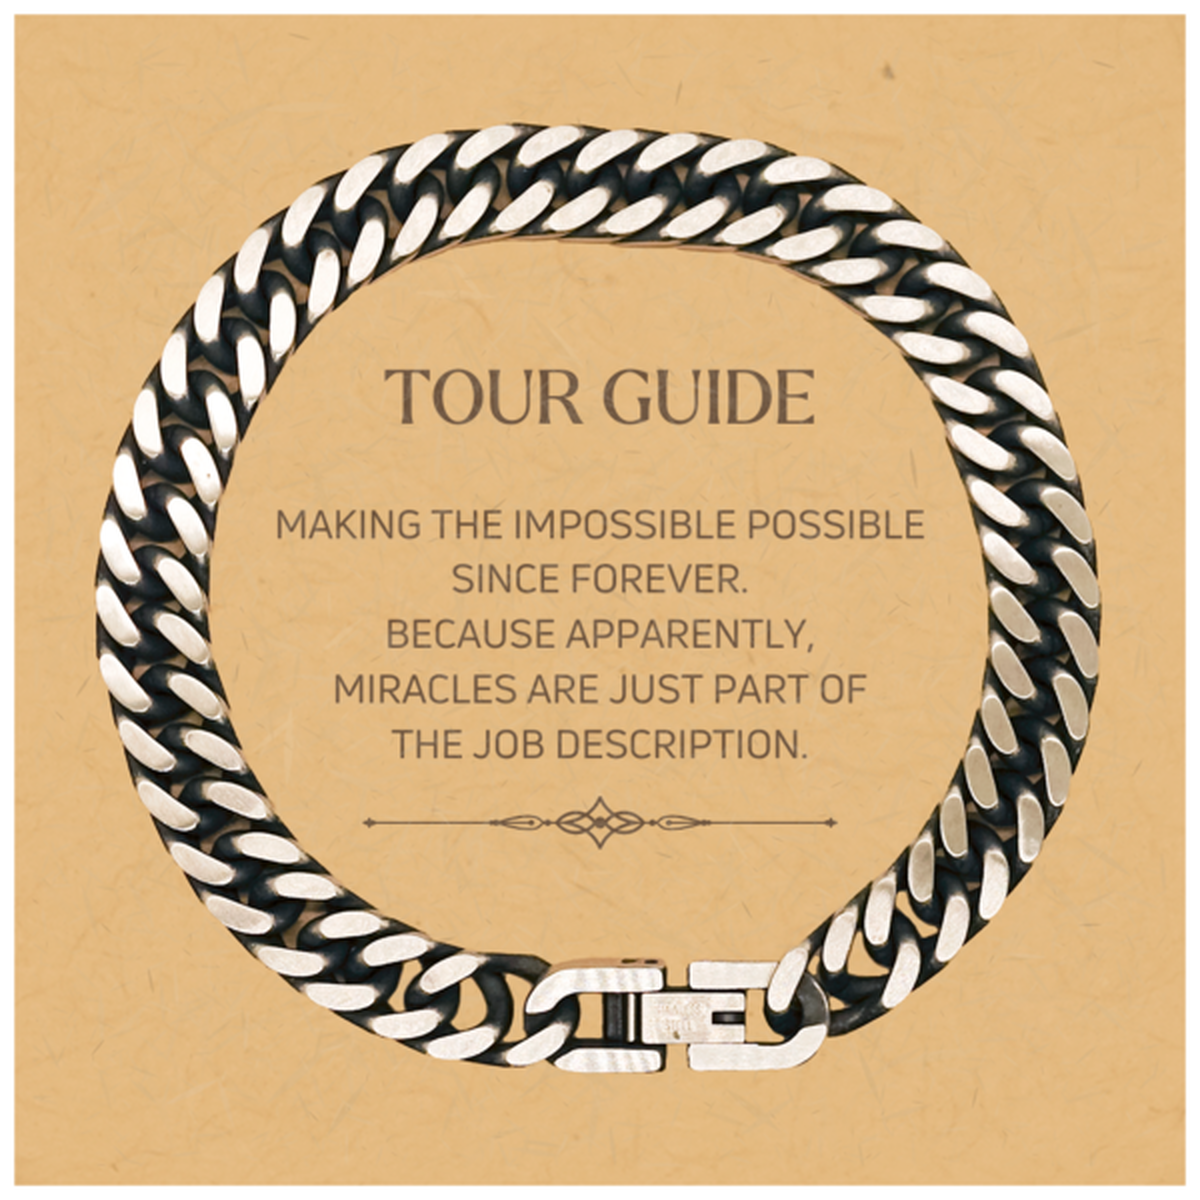 Funny Tour Guide Gifts, Miracles are just part of the job description, Inspirational Birthday Christmas Cuban Link Chain Bracelet For Tour Guide, Men, Women, Coworkers, Friends, Boss